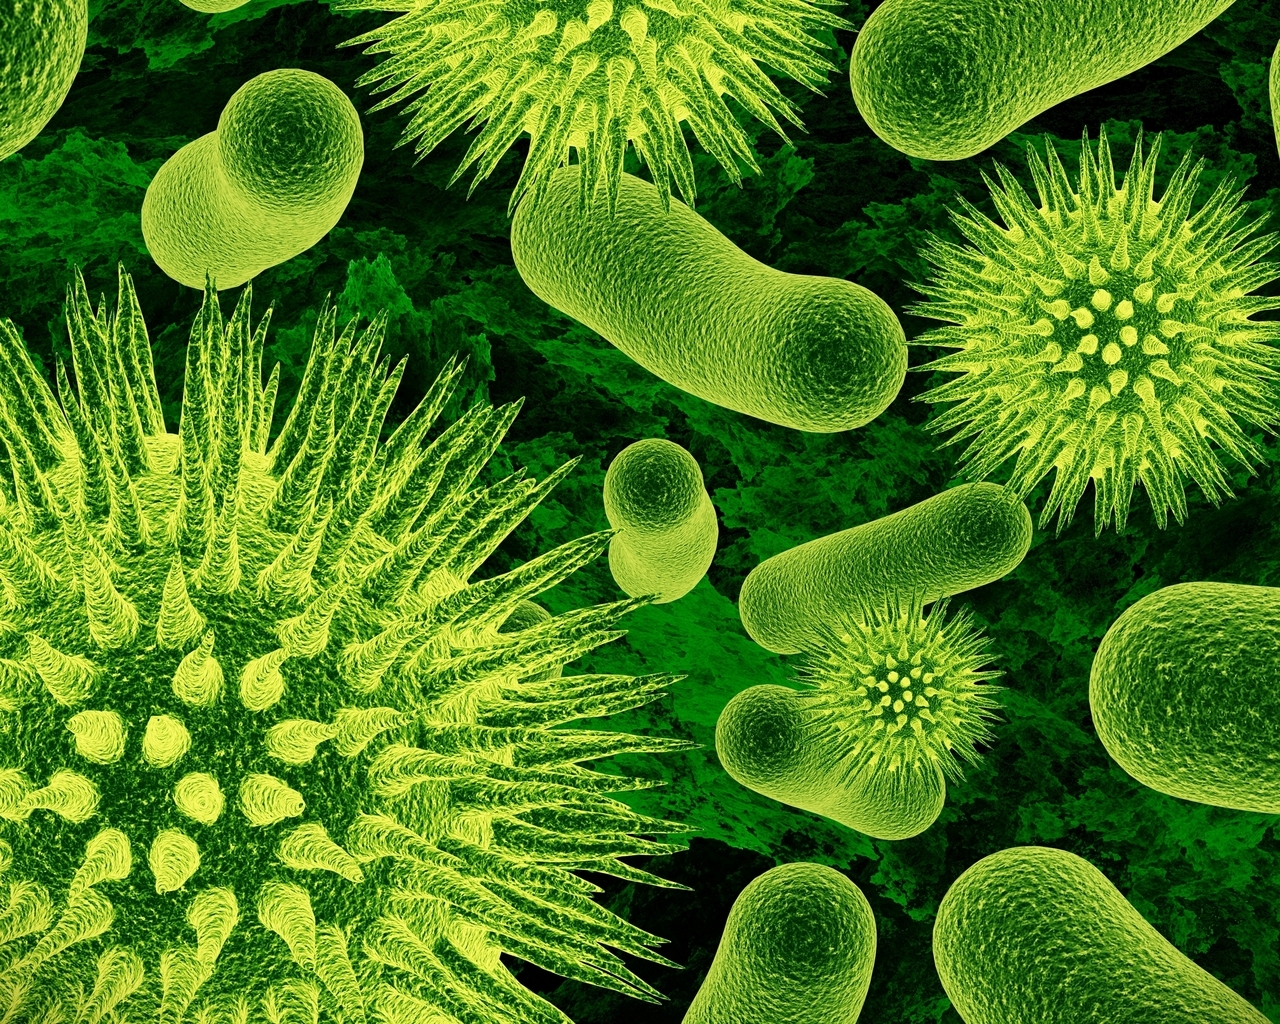 Bacteria for 1280 x 1024 resolution